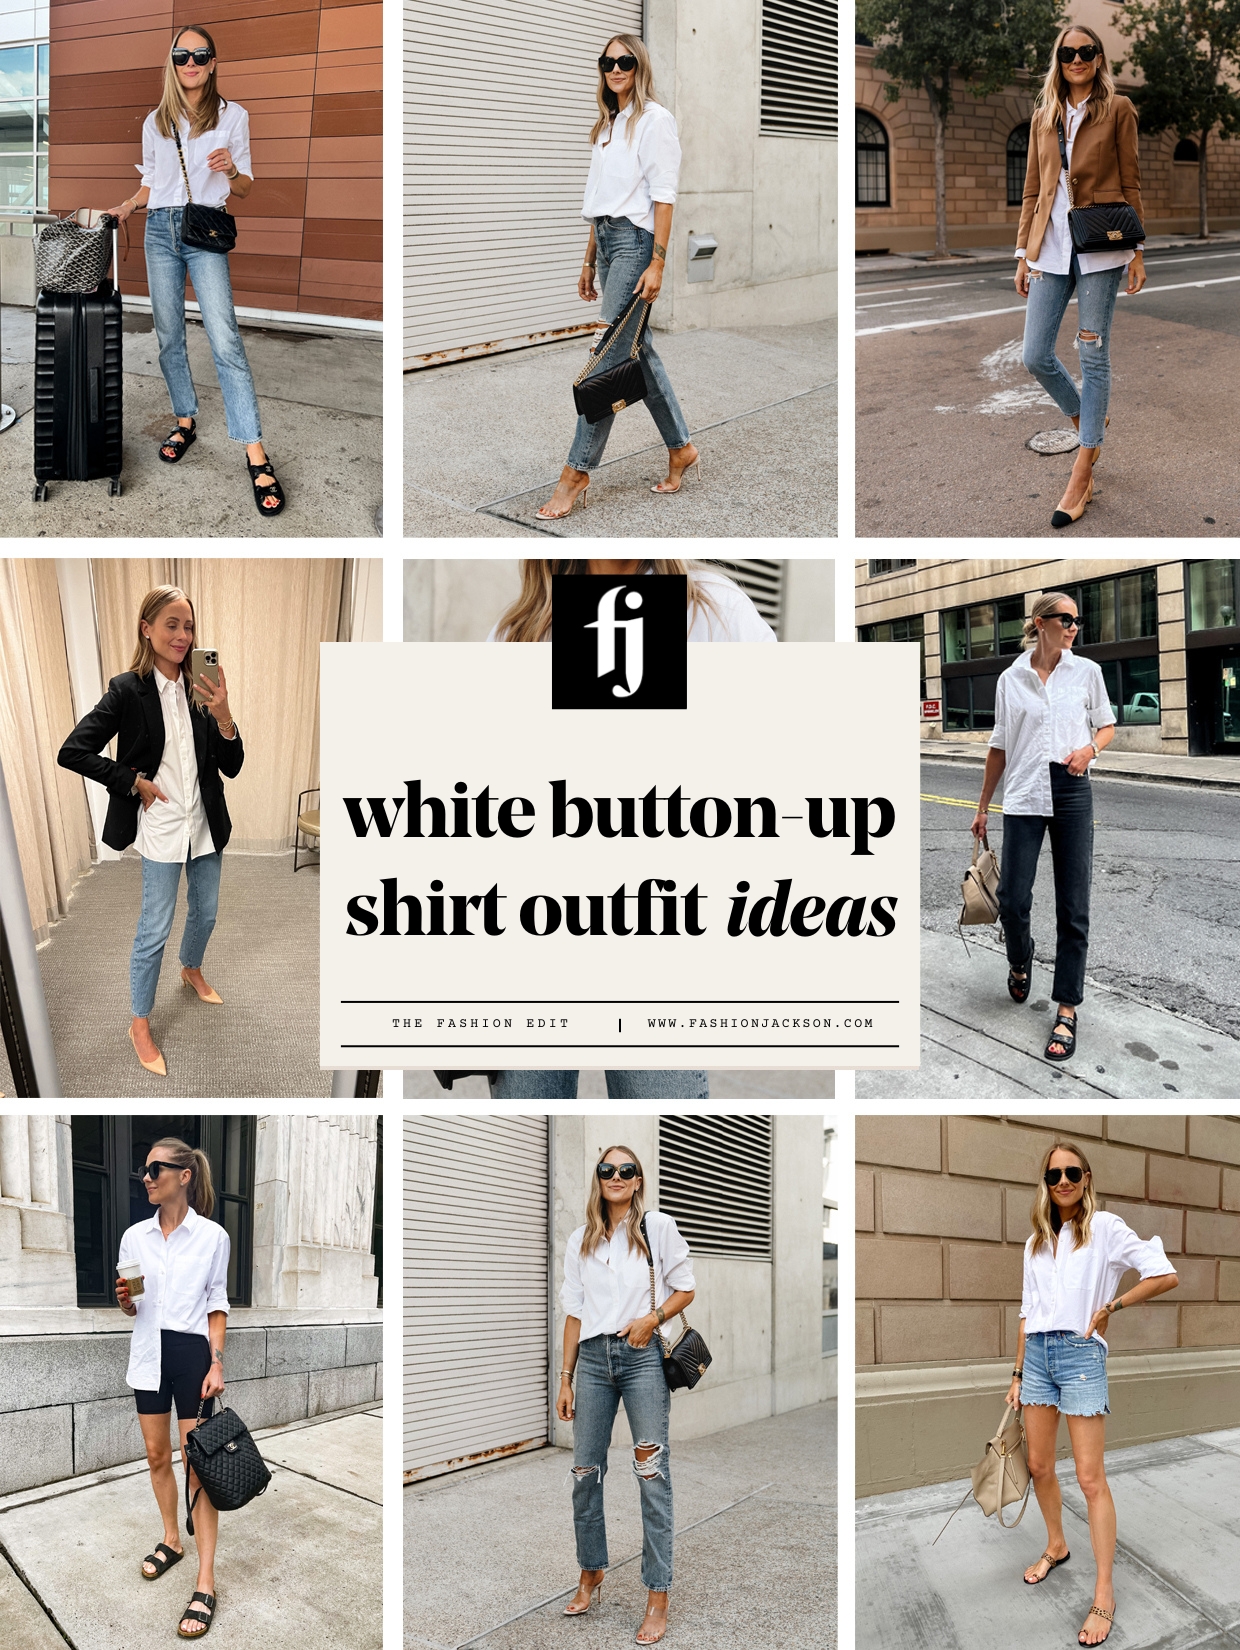 10 Trendy Ways to Style Your Oversized Button Up Outfits for a Chic Look!